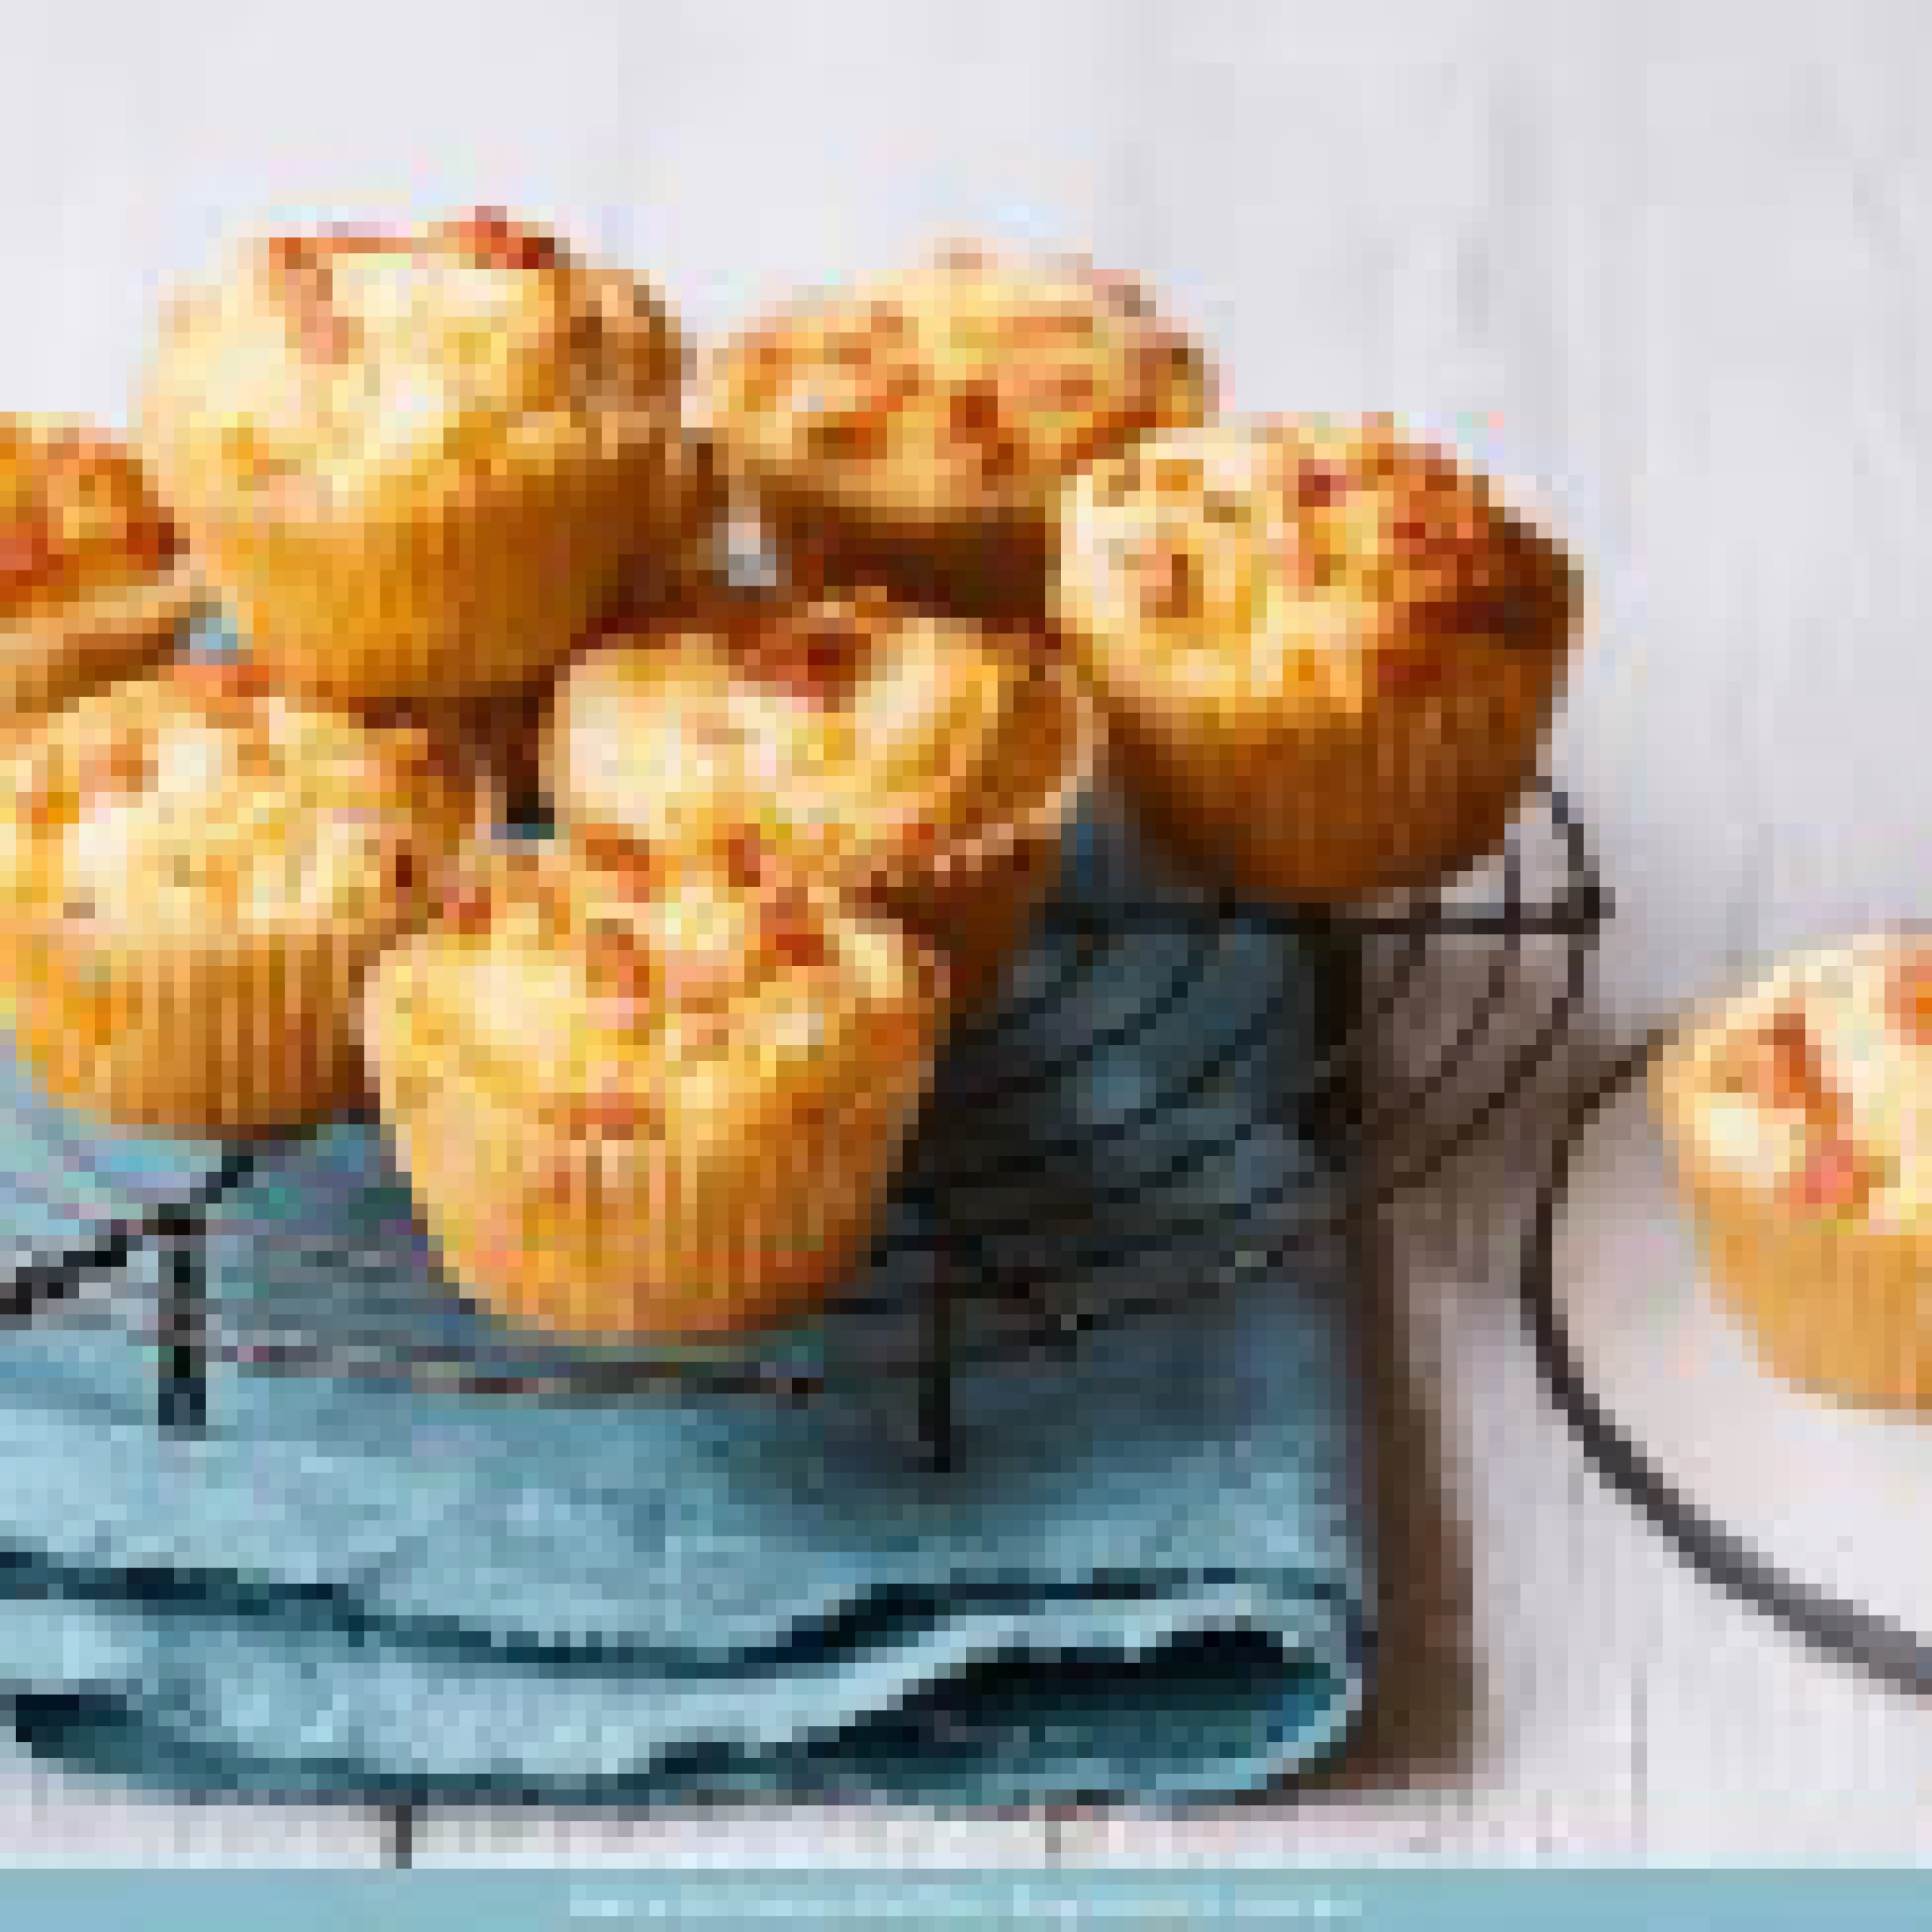 Bacon Muffins